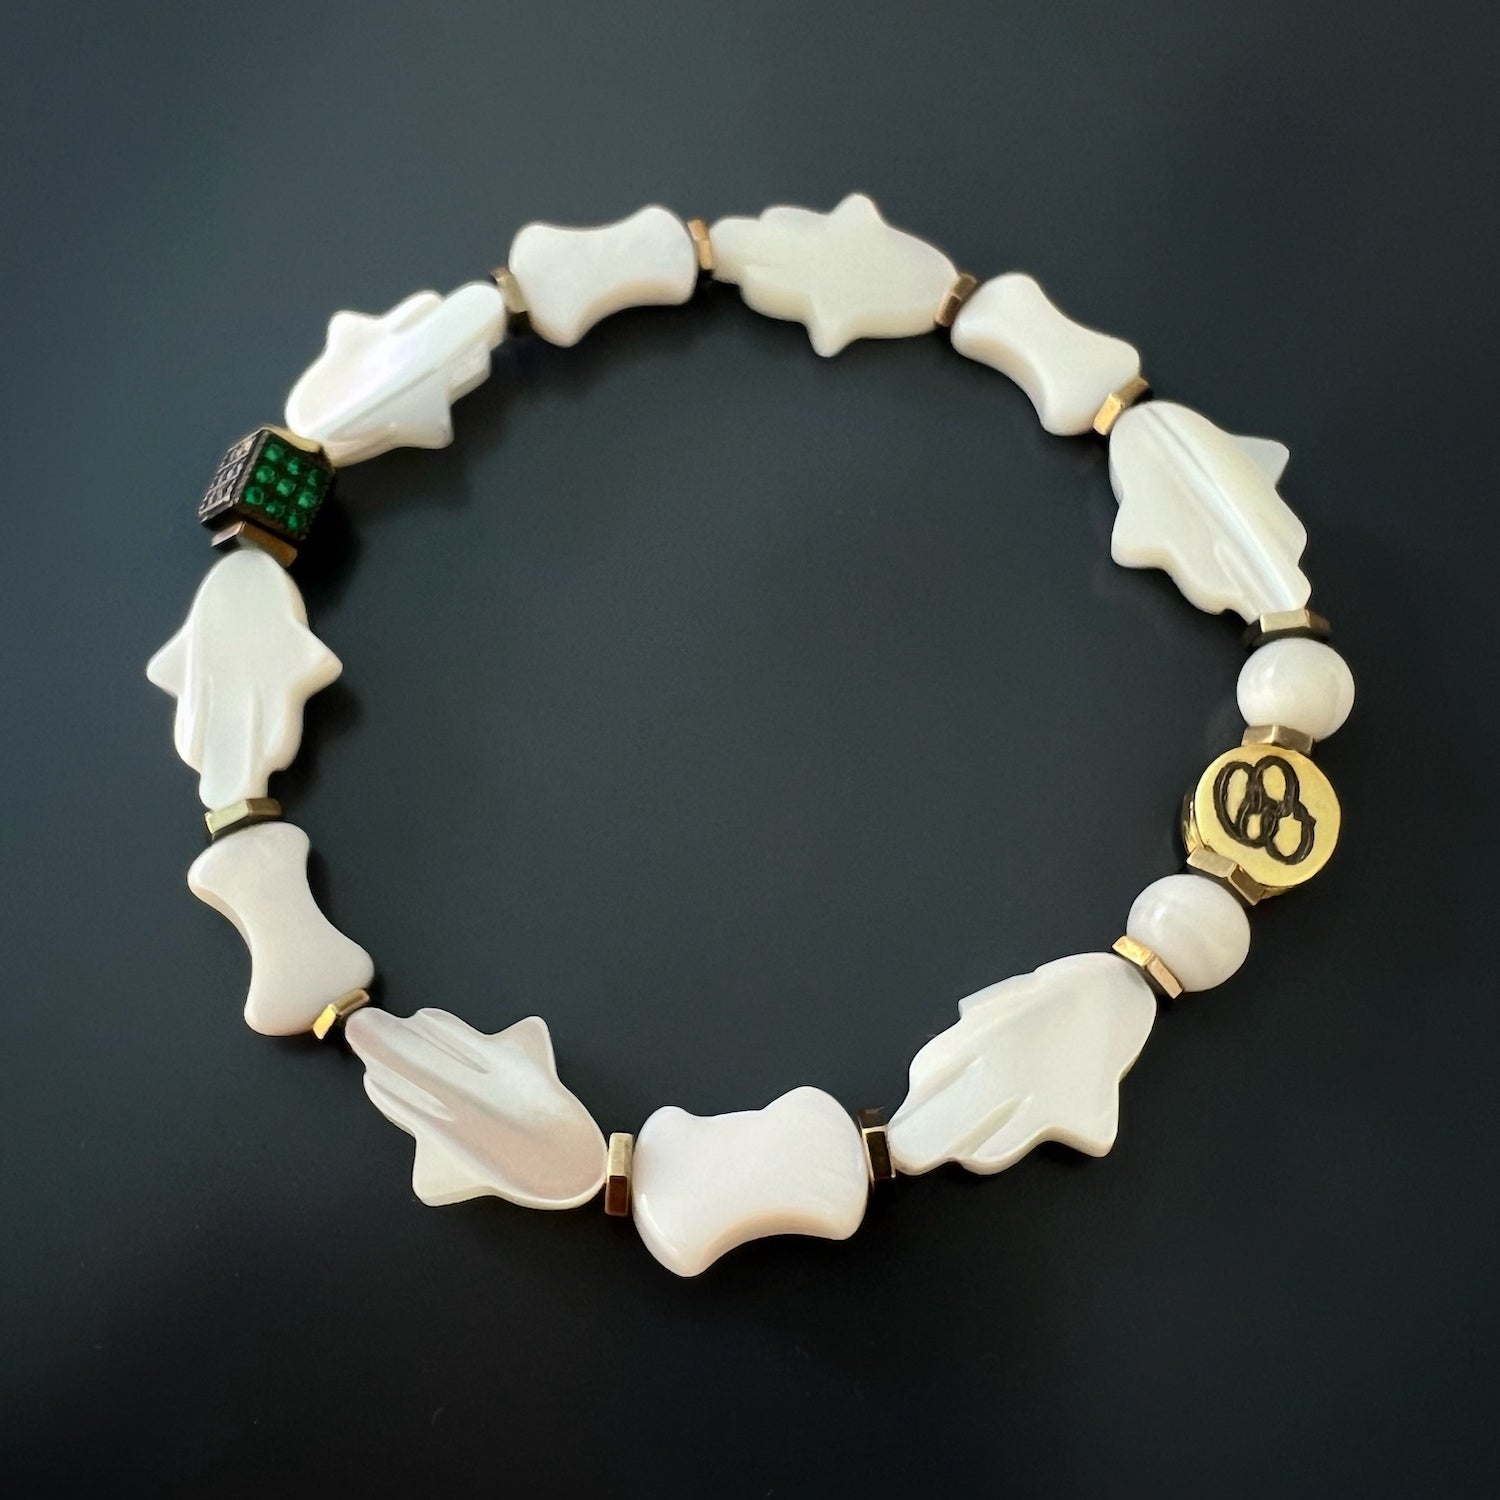 Pearl Hamsa Hand Bracelet, a unique and meaningful accessory combining traditional symbolism and modern design.